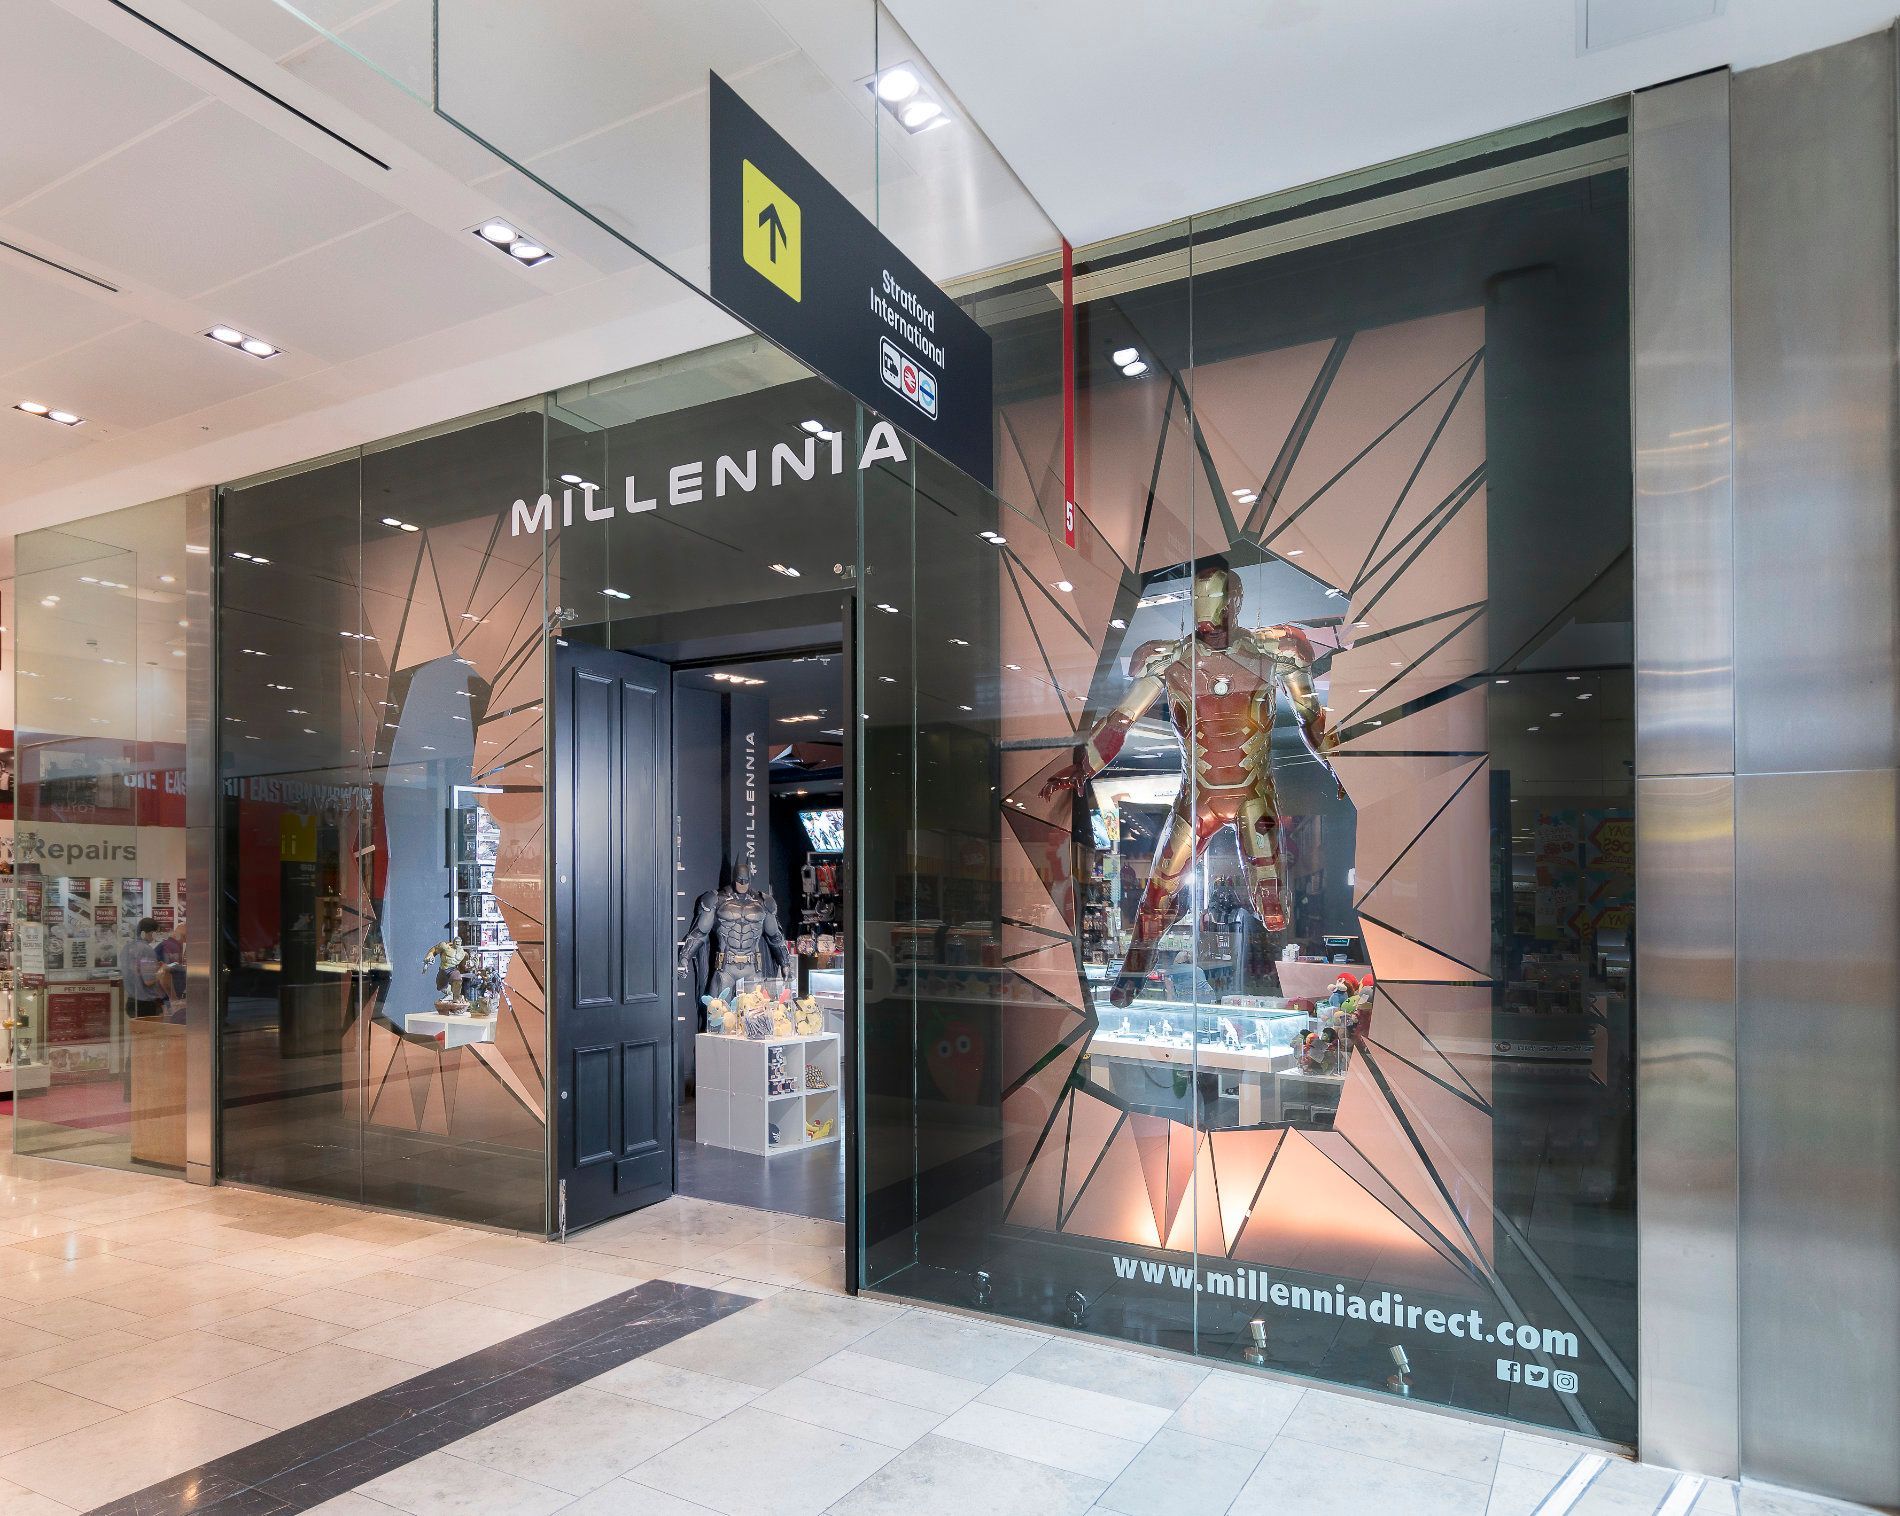 a store called millennia is located in a mall